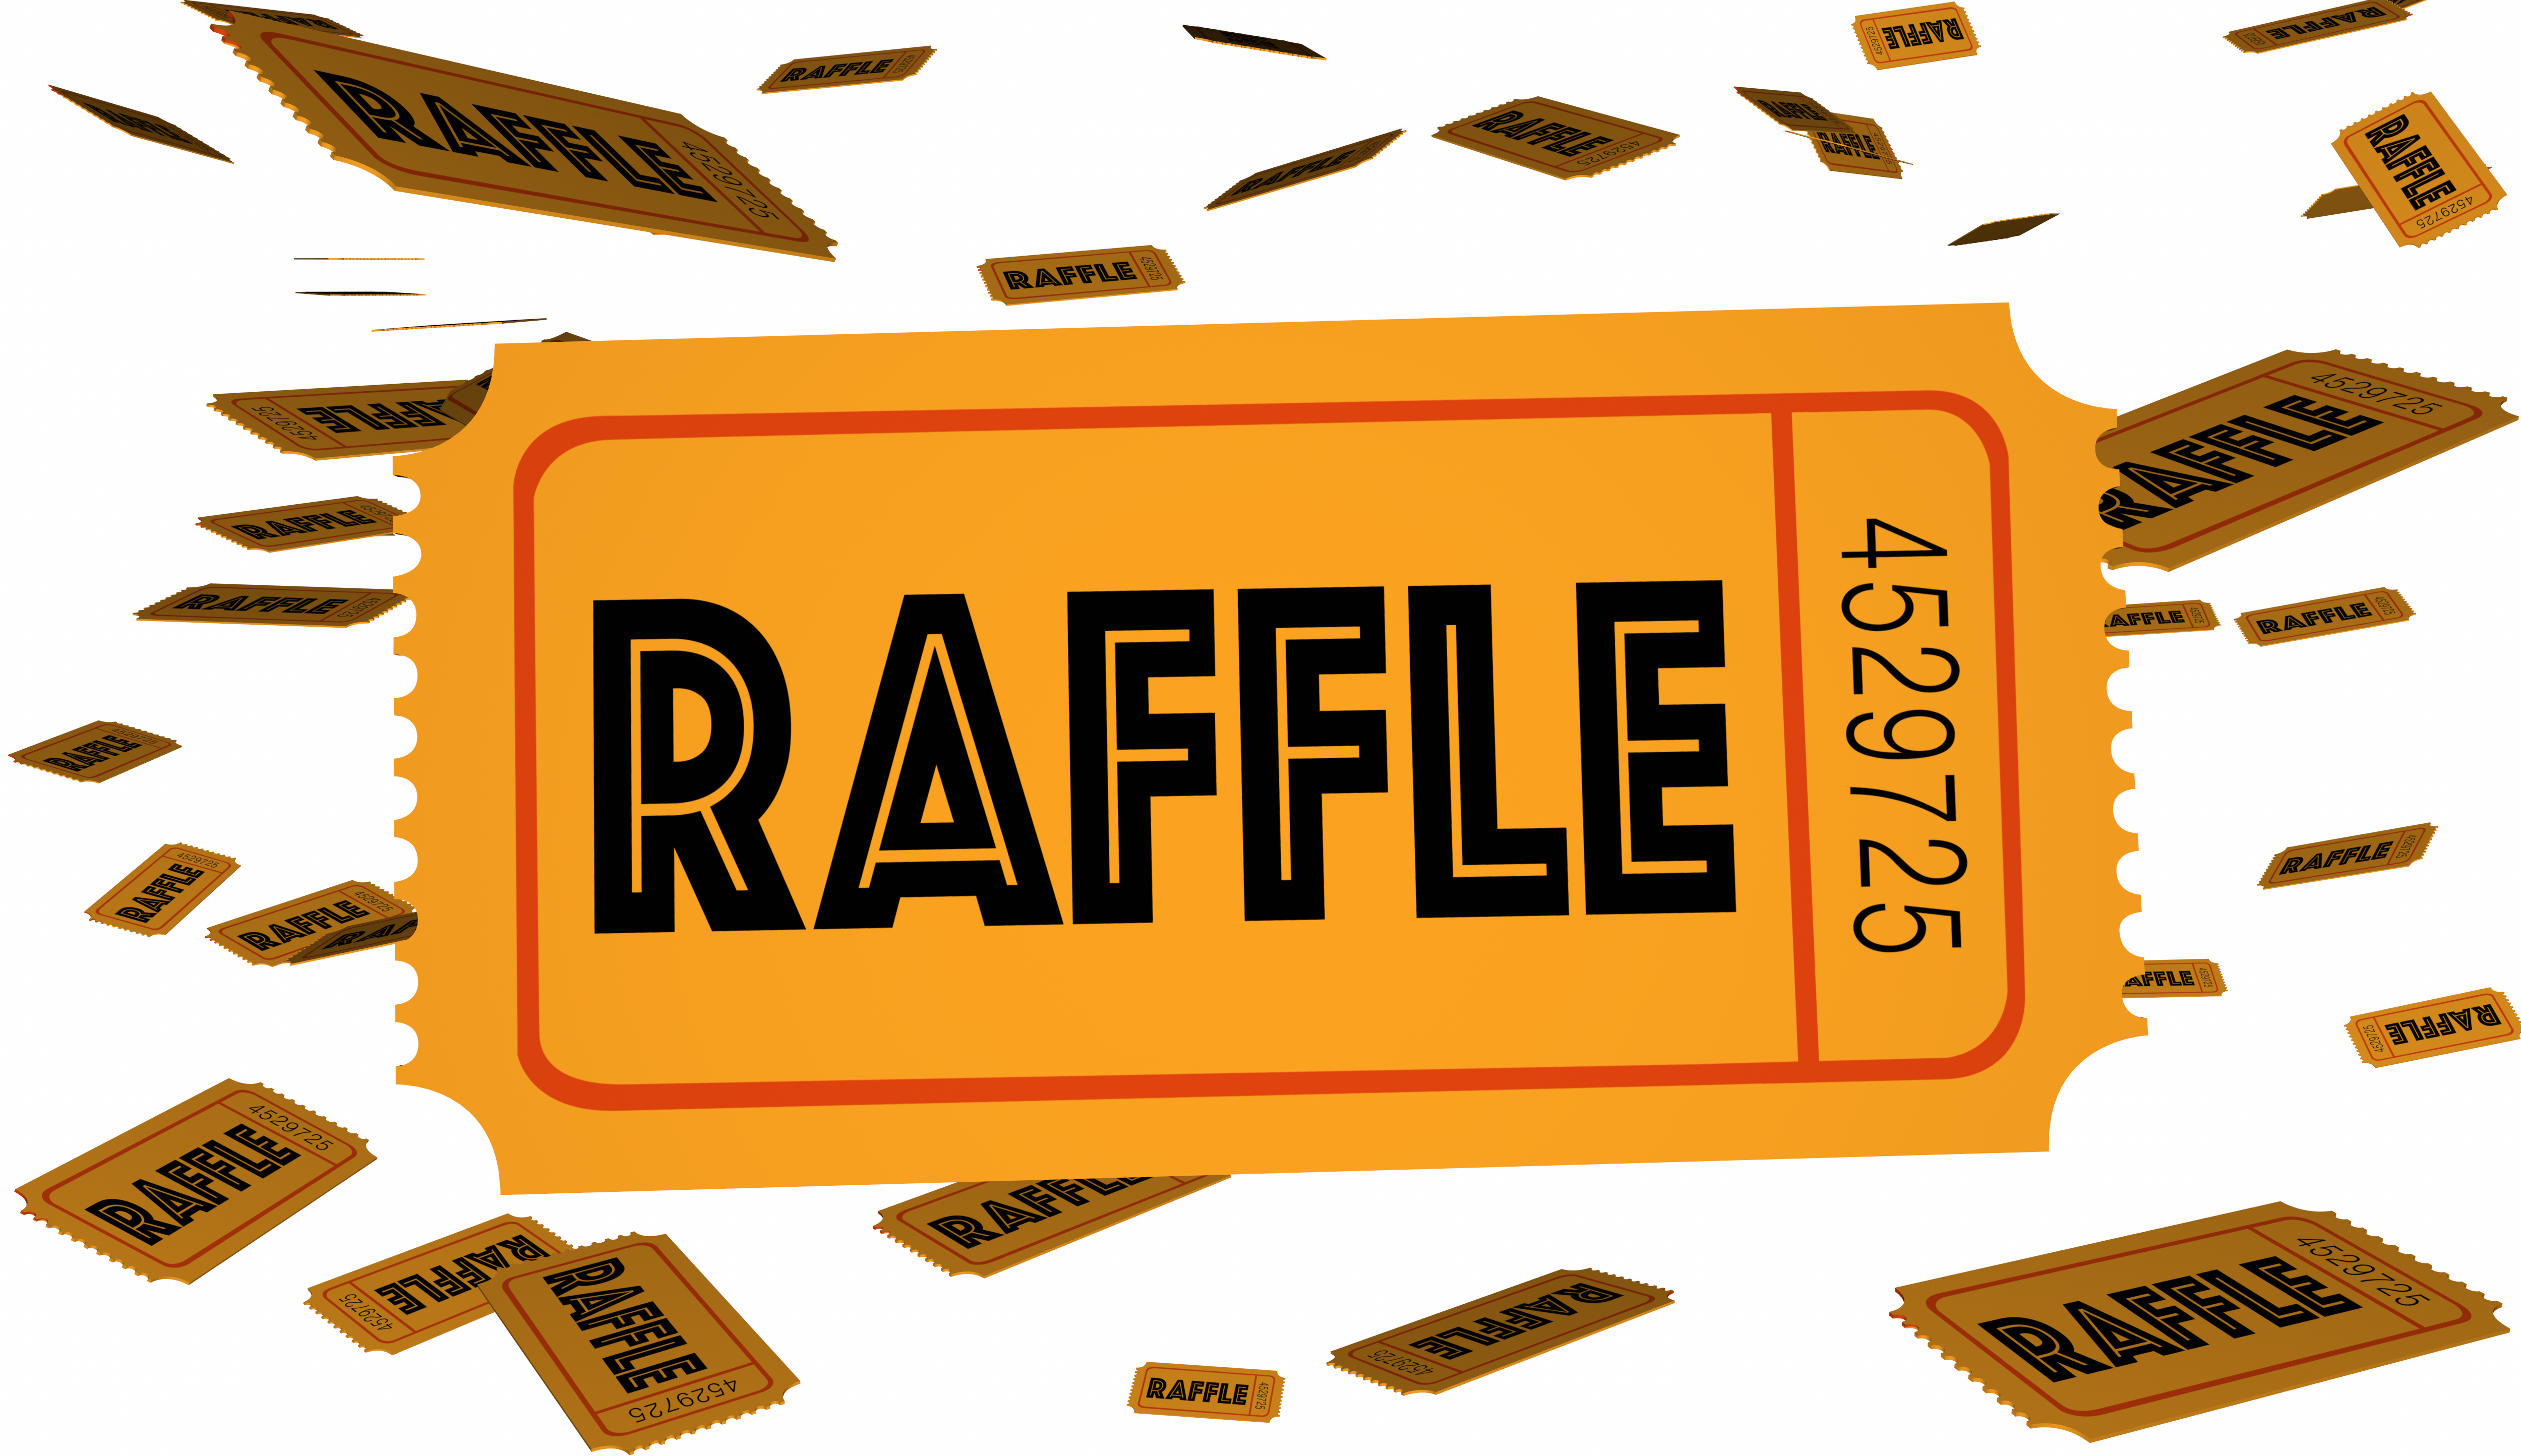 Picture #3122294 - raffle clipart event ticket. raffle clipart event ticket...